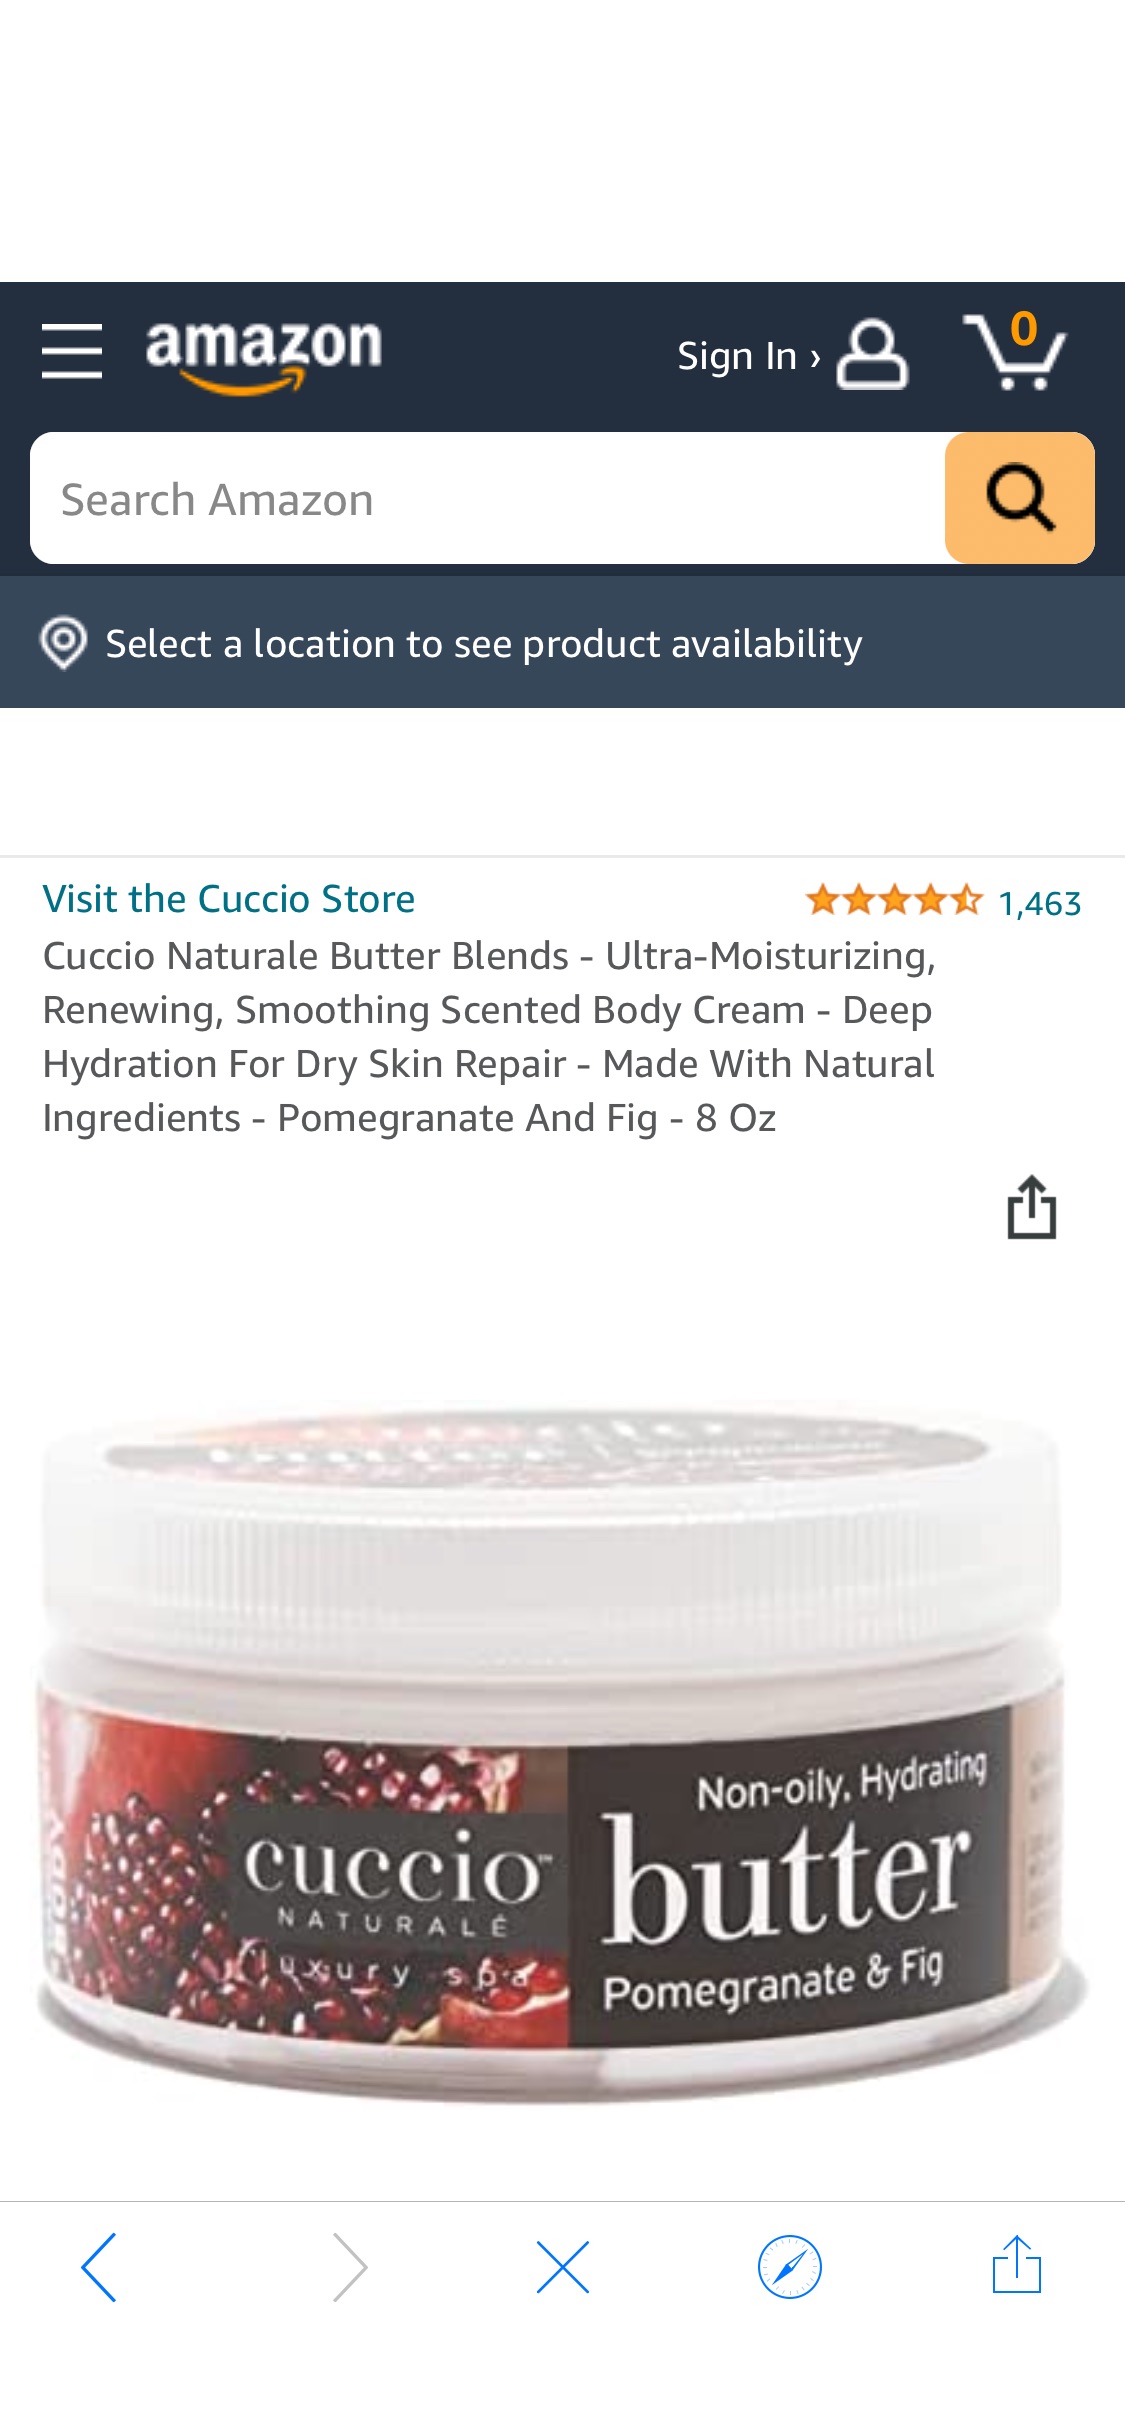 Cuccio Naturale Butter Blends - Ultra-Moisturizing, Renewing, Smoothing Scented Body Cream - Deep Hydration For Dry Skin Repair - Made With Natural Ingredients - Pomegranate And Fig